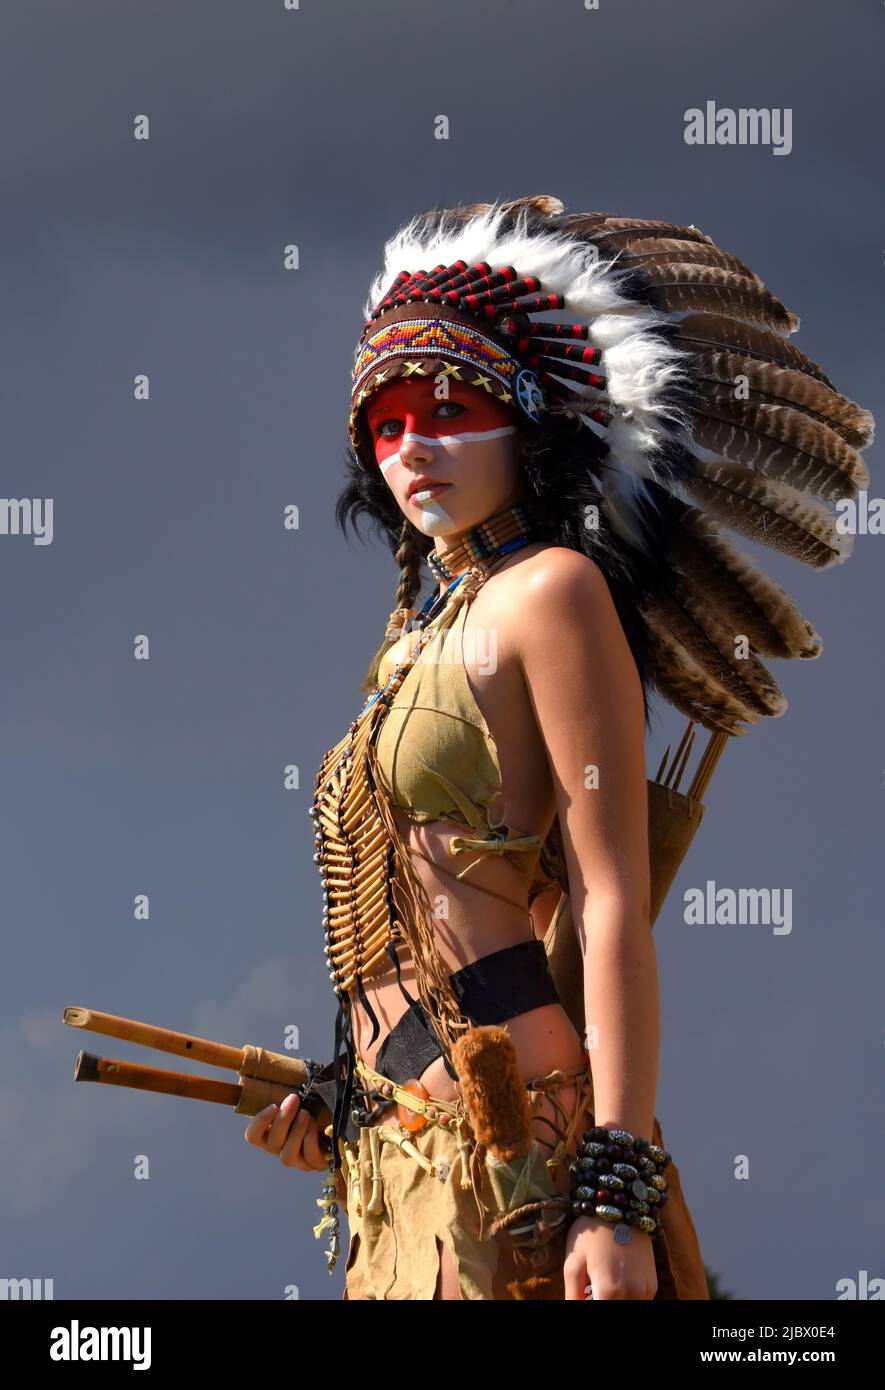 A native American Indian woman is seen standing in front of grey stormclouds. She wears a feathered headdress and has traditional Indian clothing on. Stock Photo